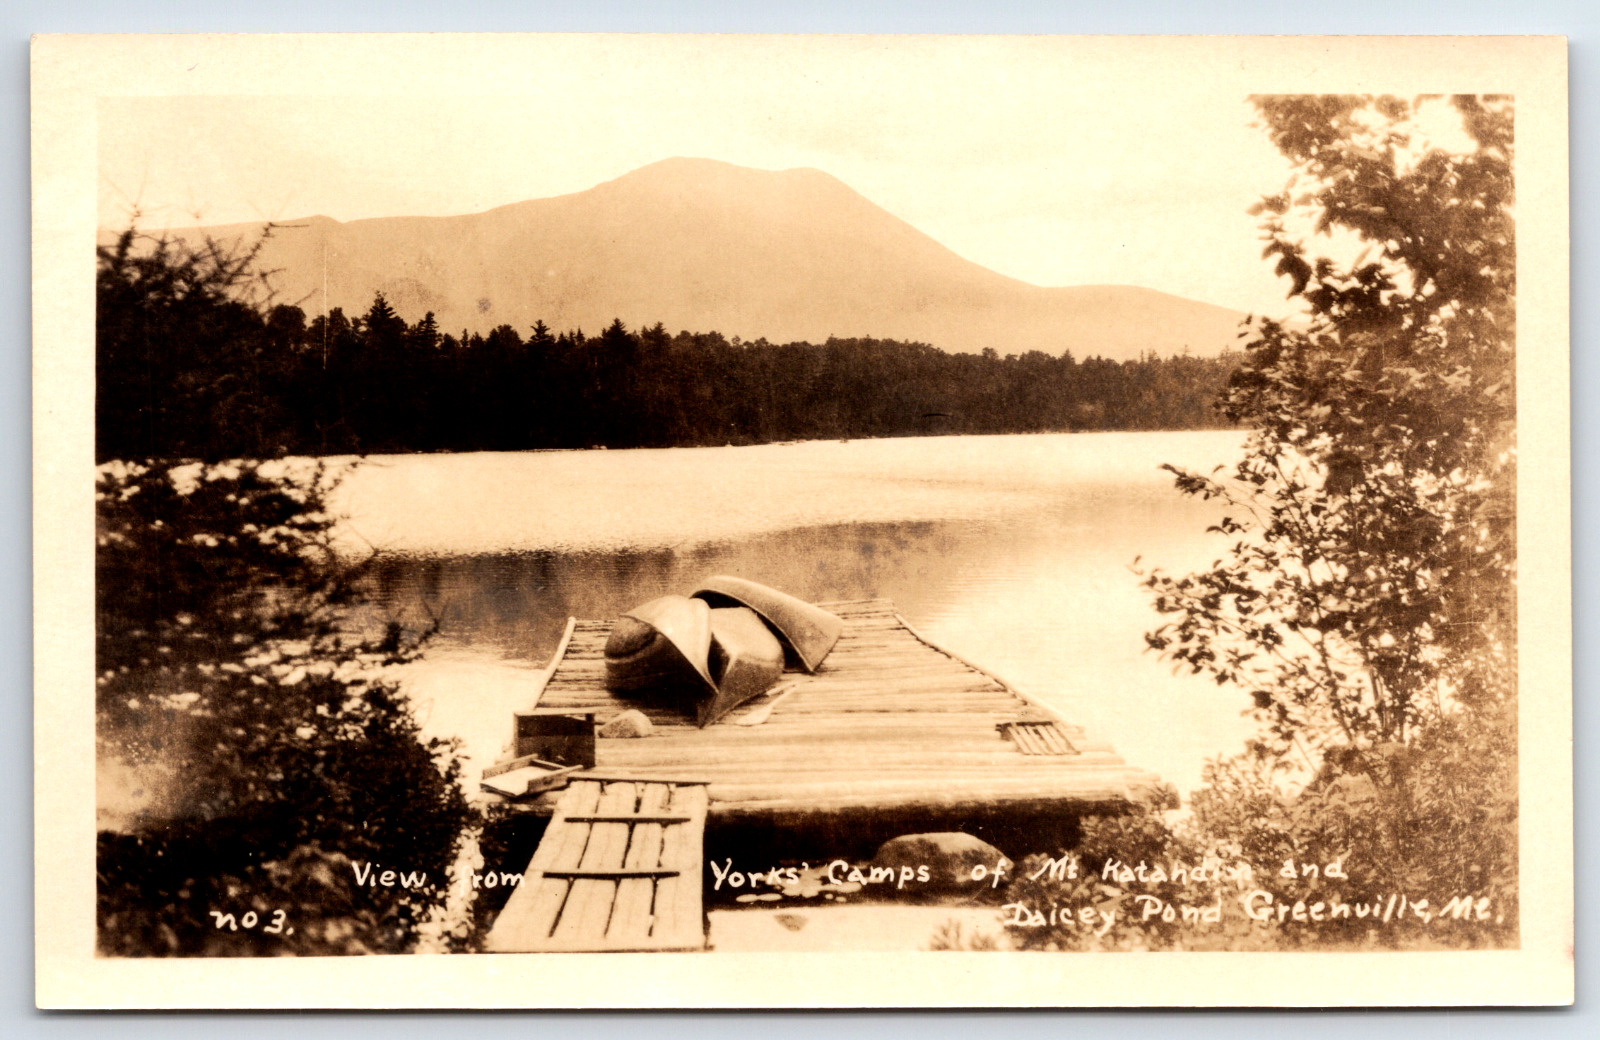 View from York\'s Camp of Mt Katahdin and Daicey Pond Greenville Real Photo ME